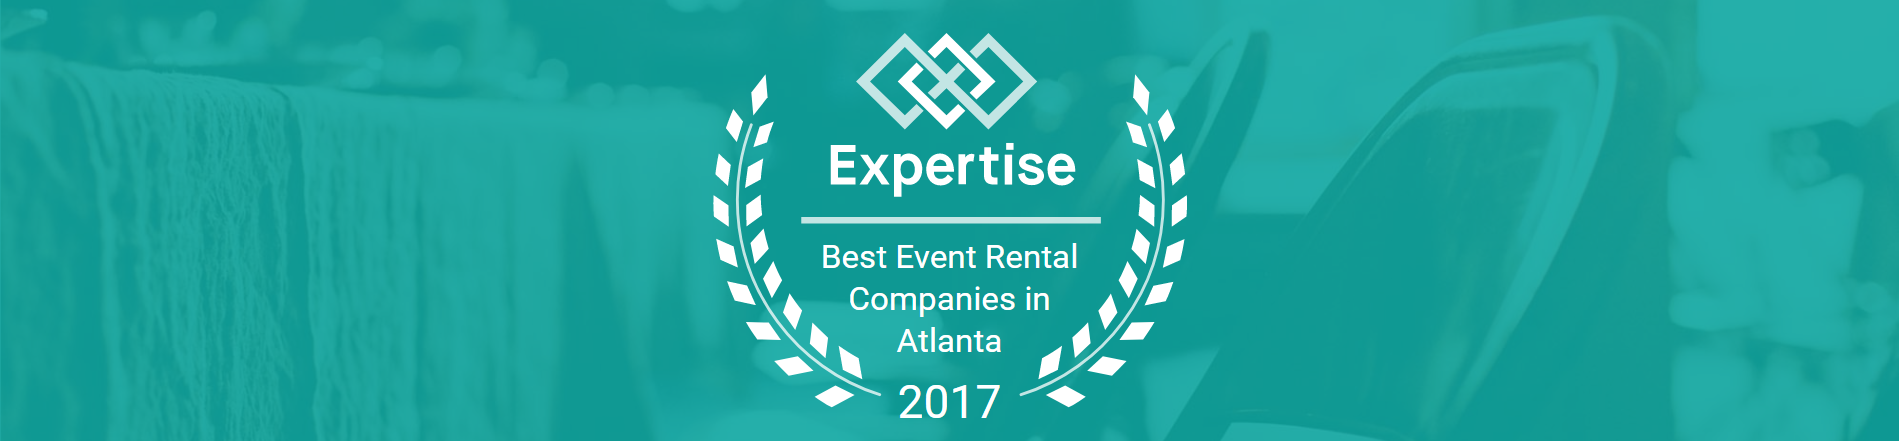 Rentalry Party Rental Service Top Rated by Expertise.com